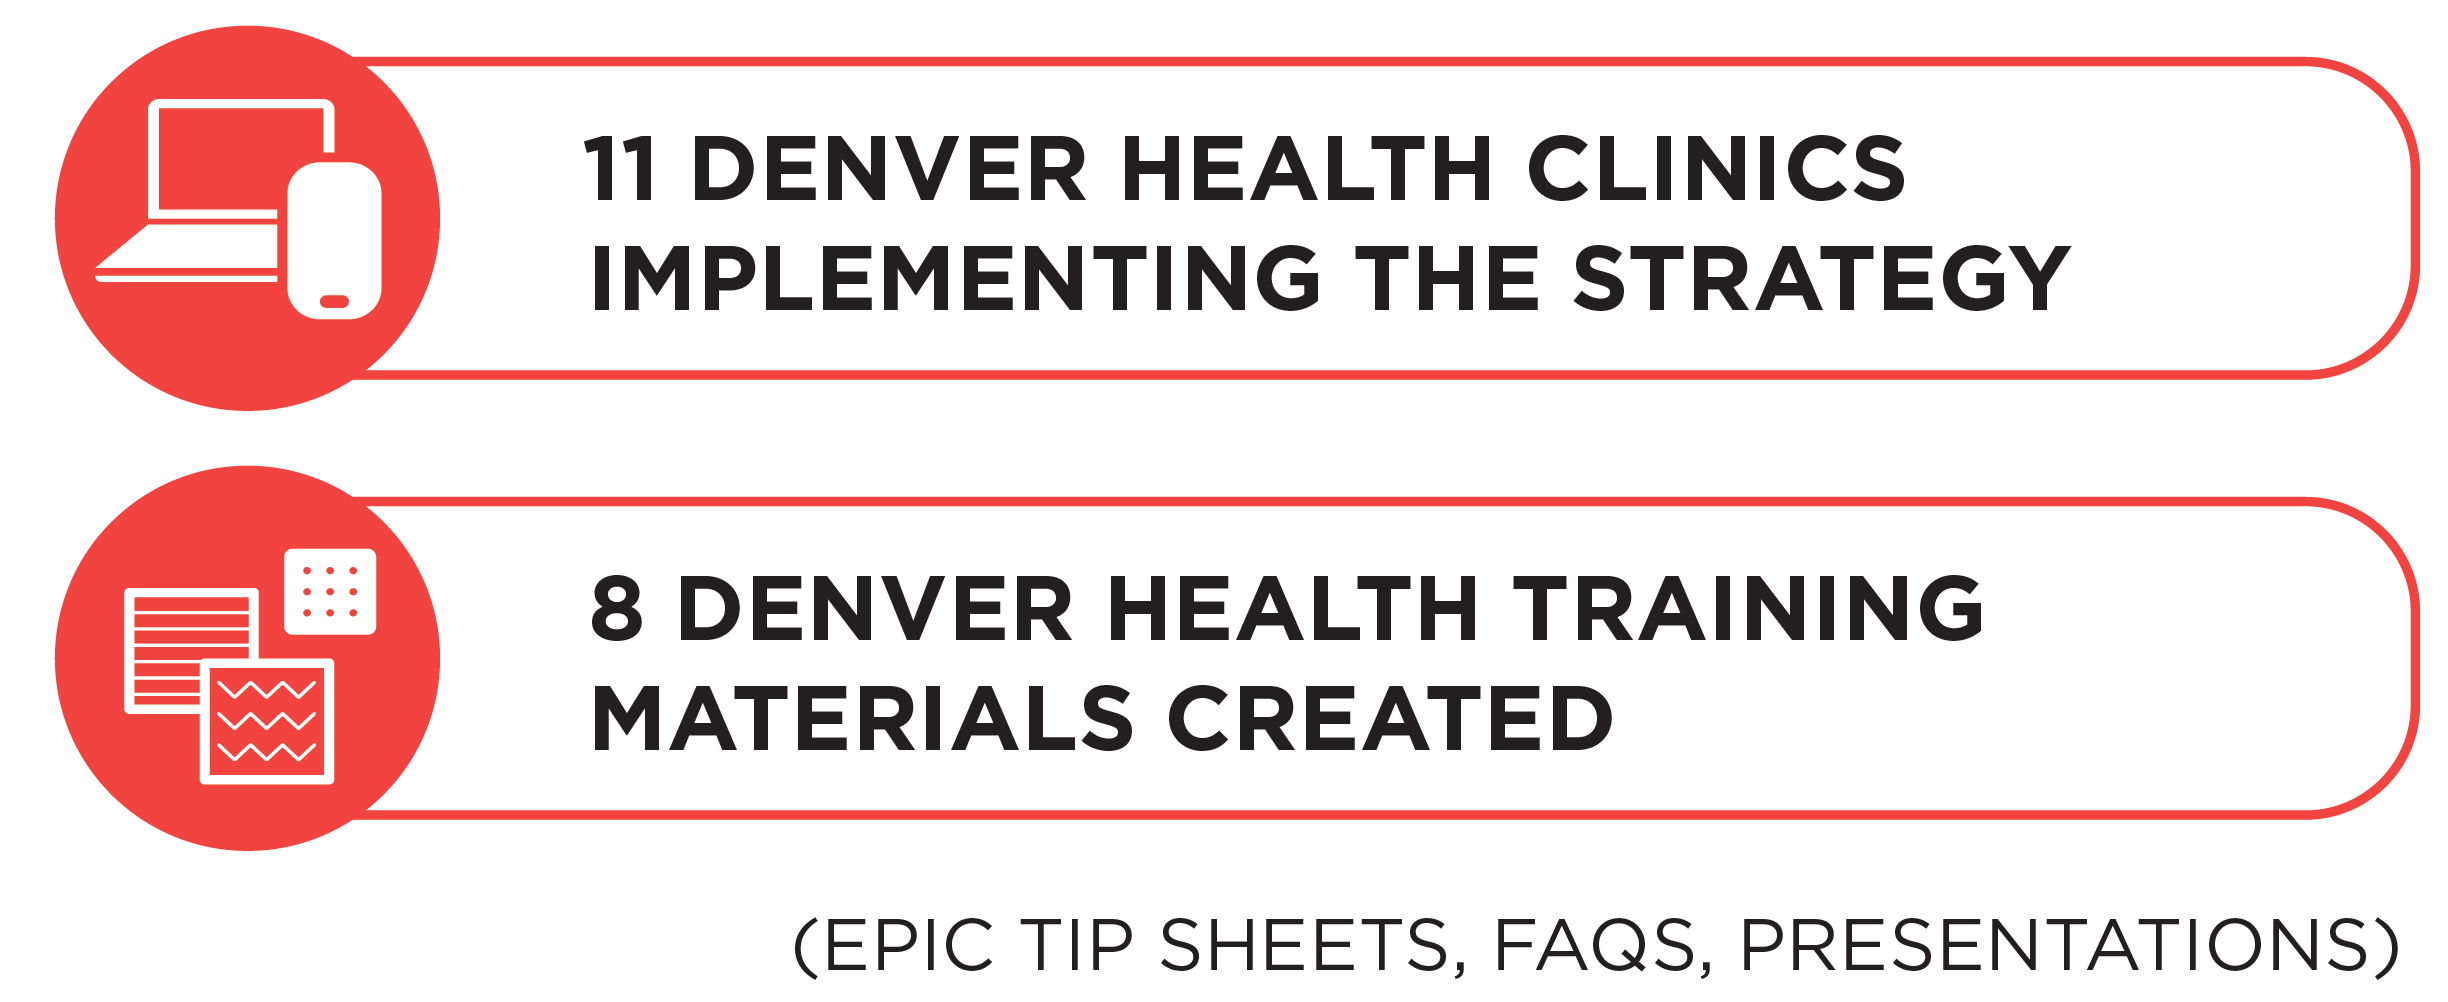 An info graphic that states: "11 Denver health clinics implementing the strategy," and "8 Denver health training materials created."